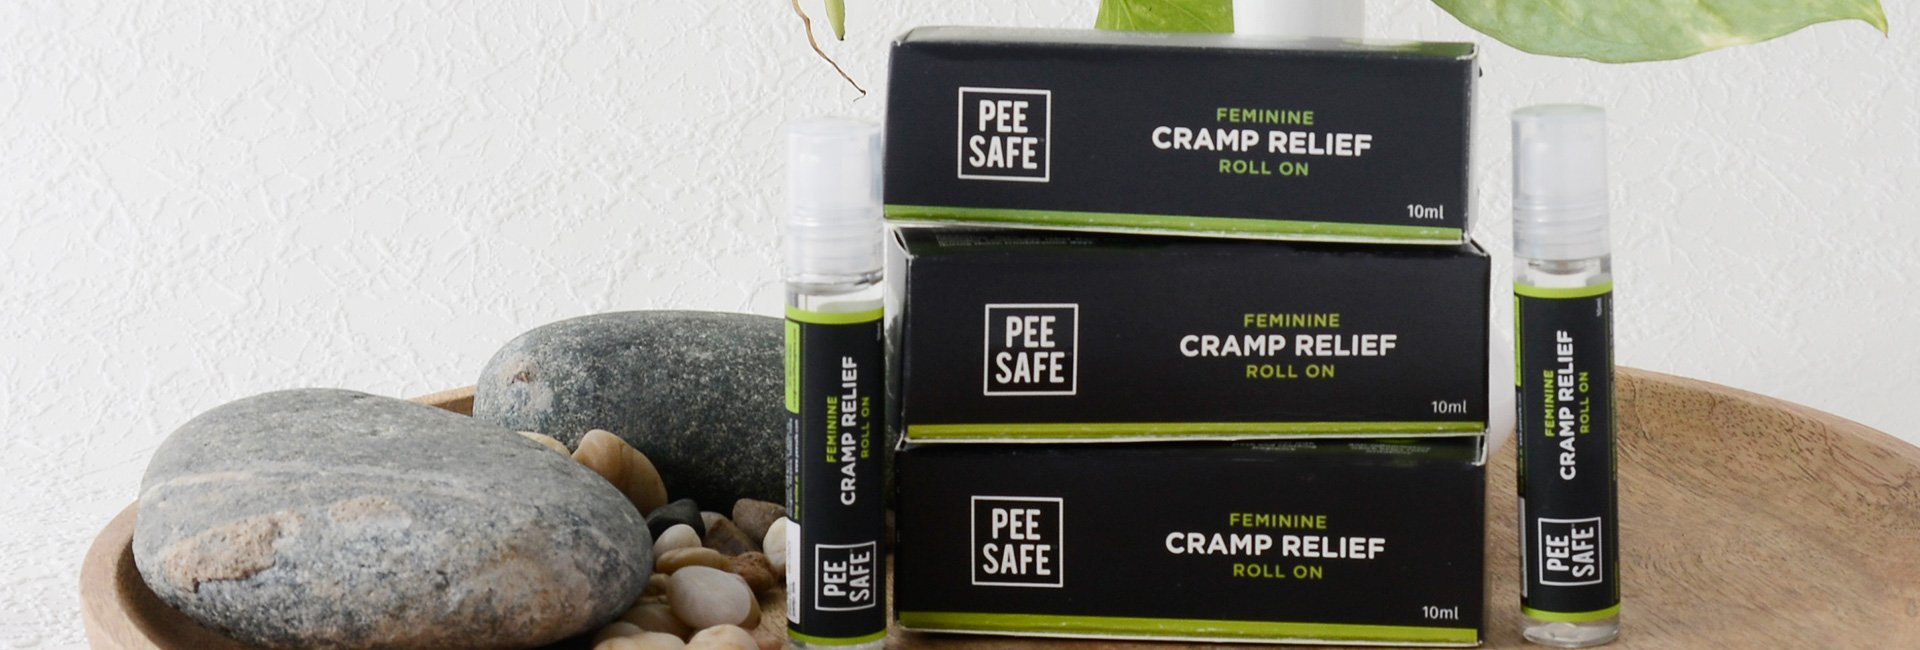 Feminine Cramp Relief Roll On - A natural pain reliever for cramps